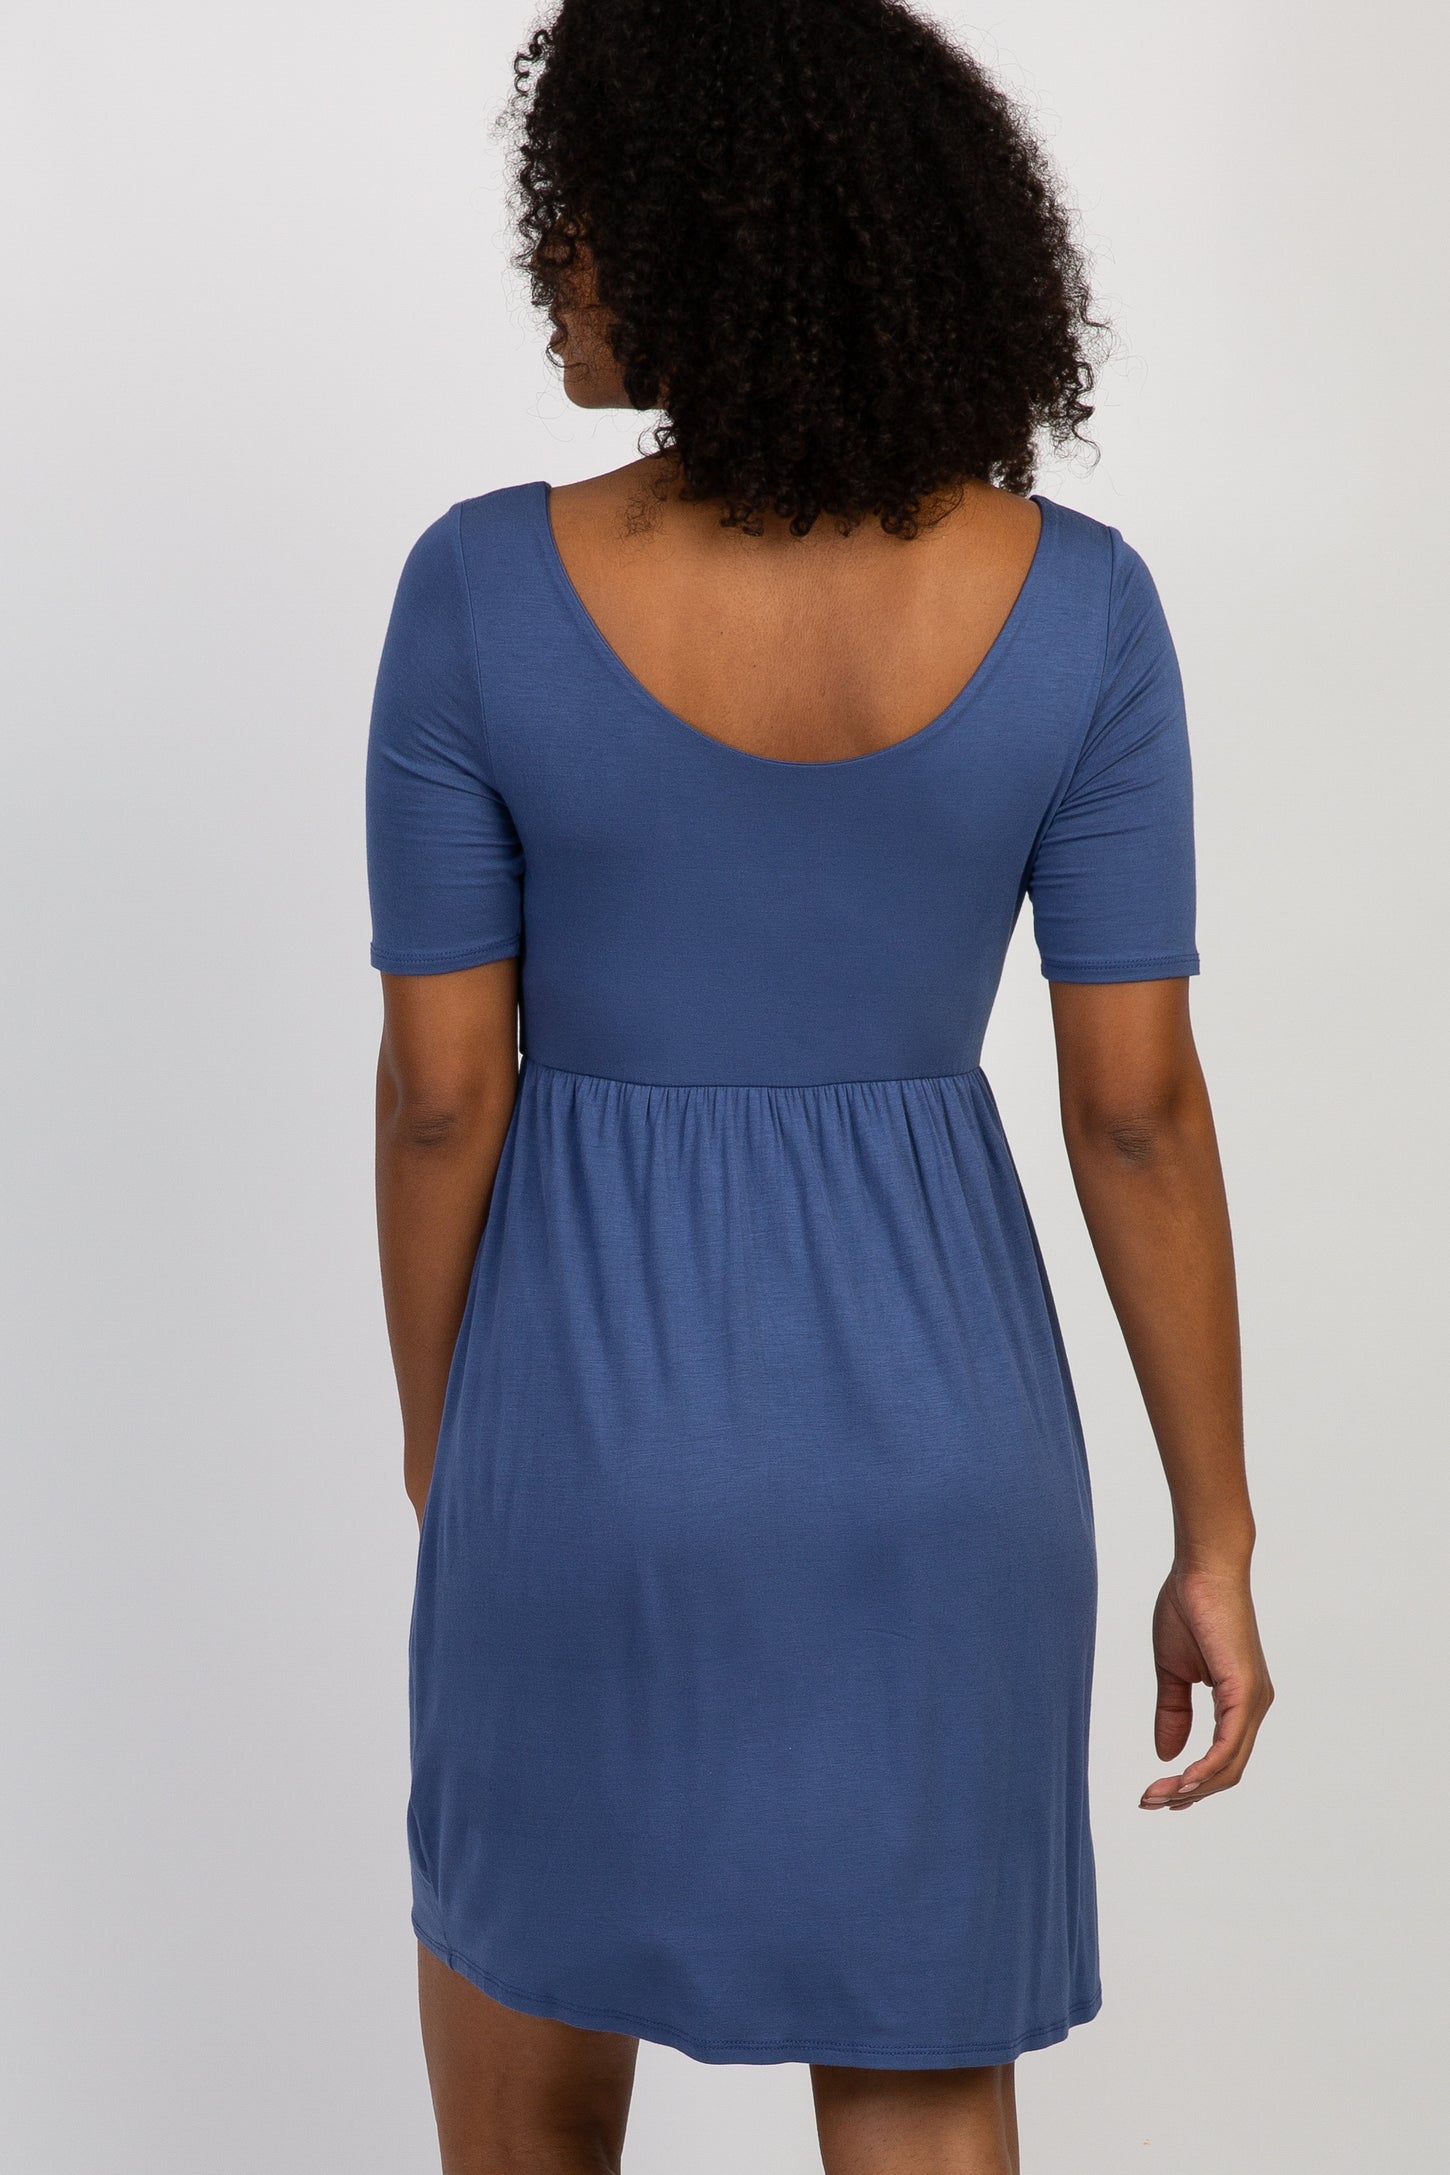 PinkBlush Blue Solid Button Front Dress